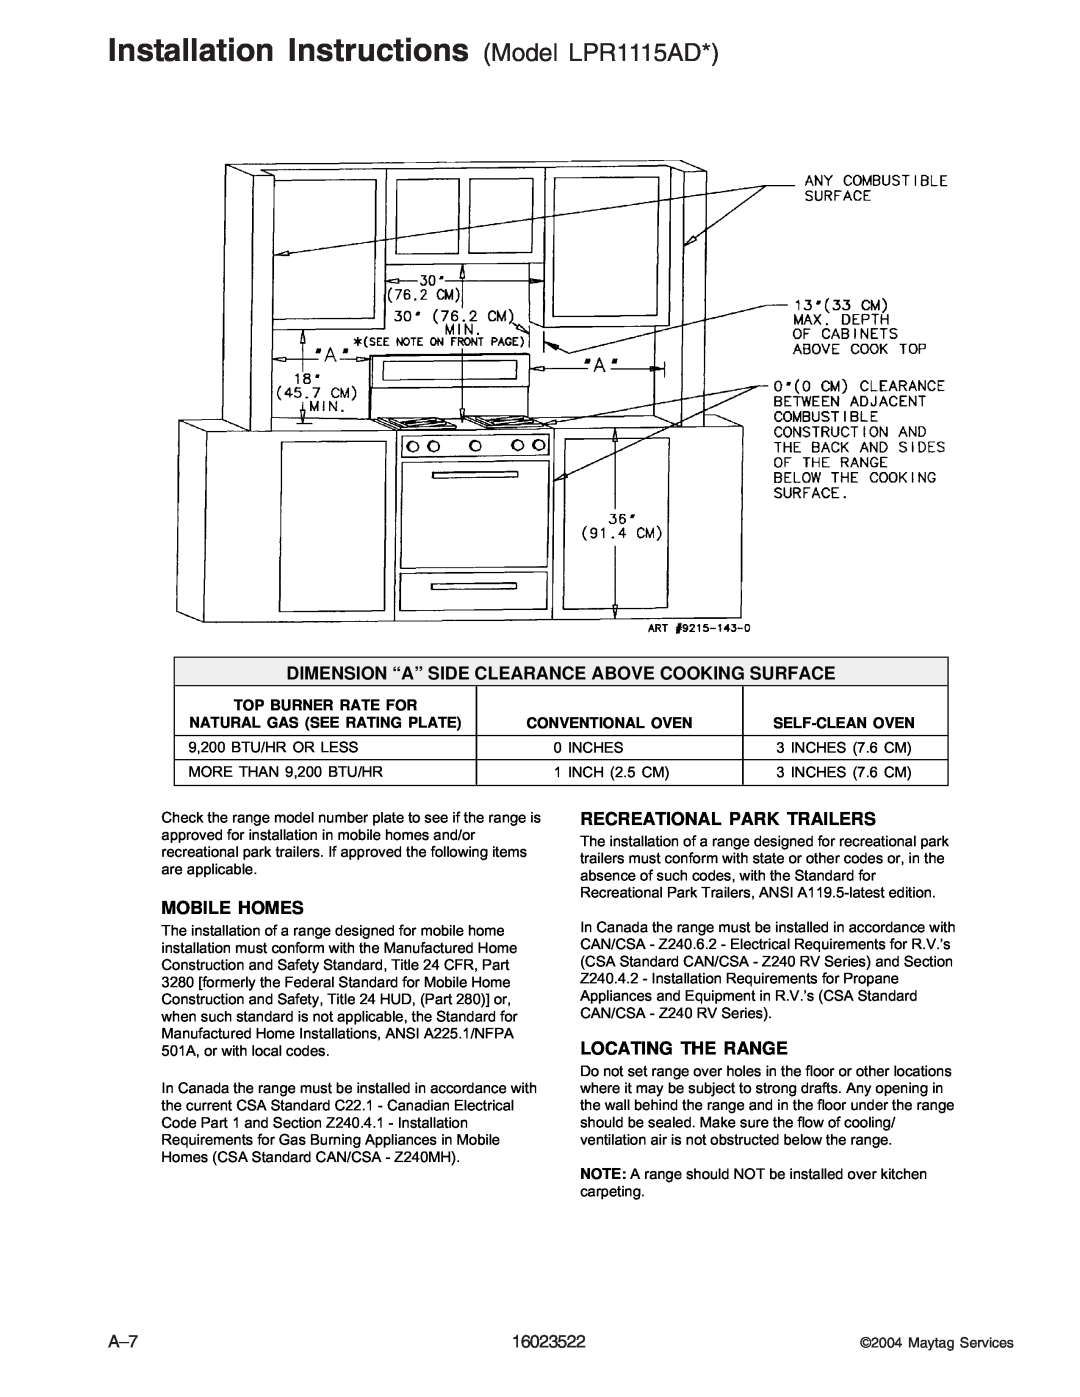 Maytag CG31400ADW, CPL1100ADH/L/Q/T/W, CPL1110ADH/L/T Installation Instructions Model LPR1115AD, 16023522, Maytag Services 